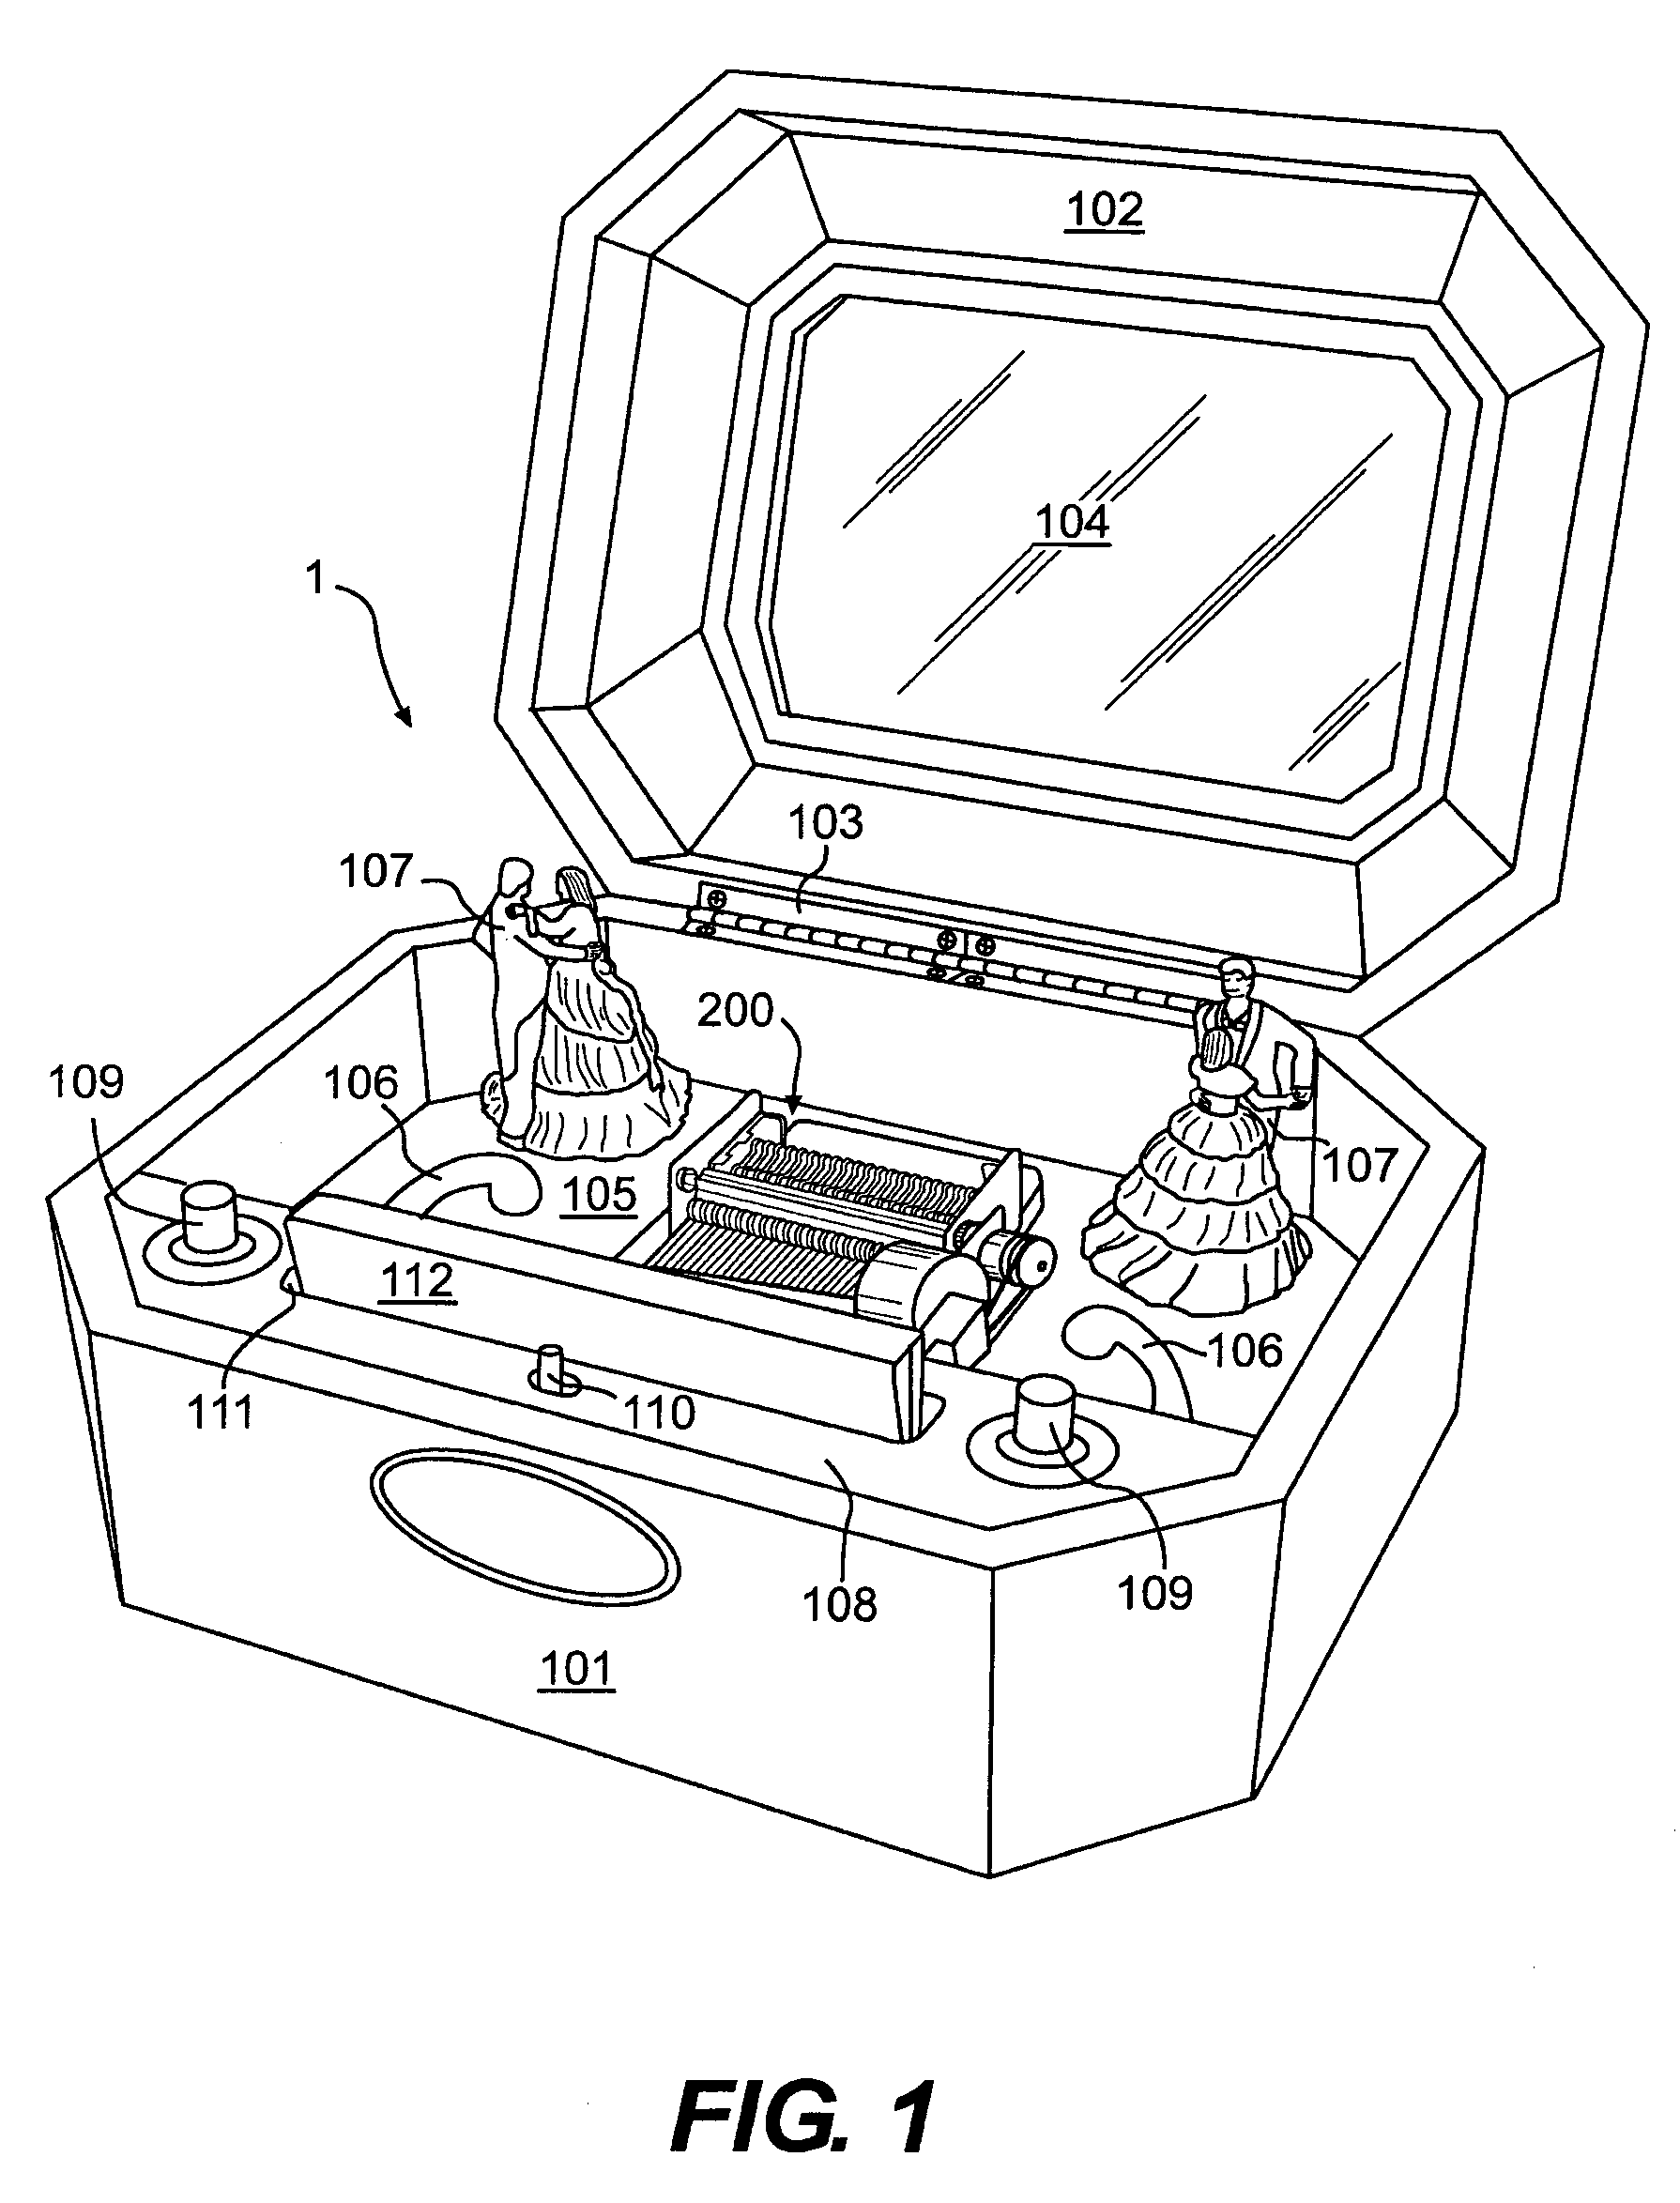 Automatic musical instrument